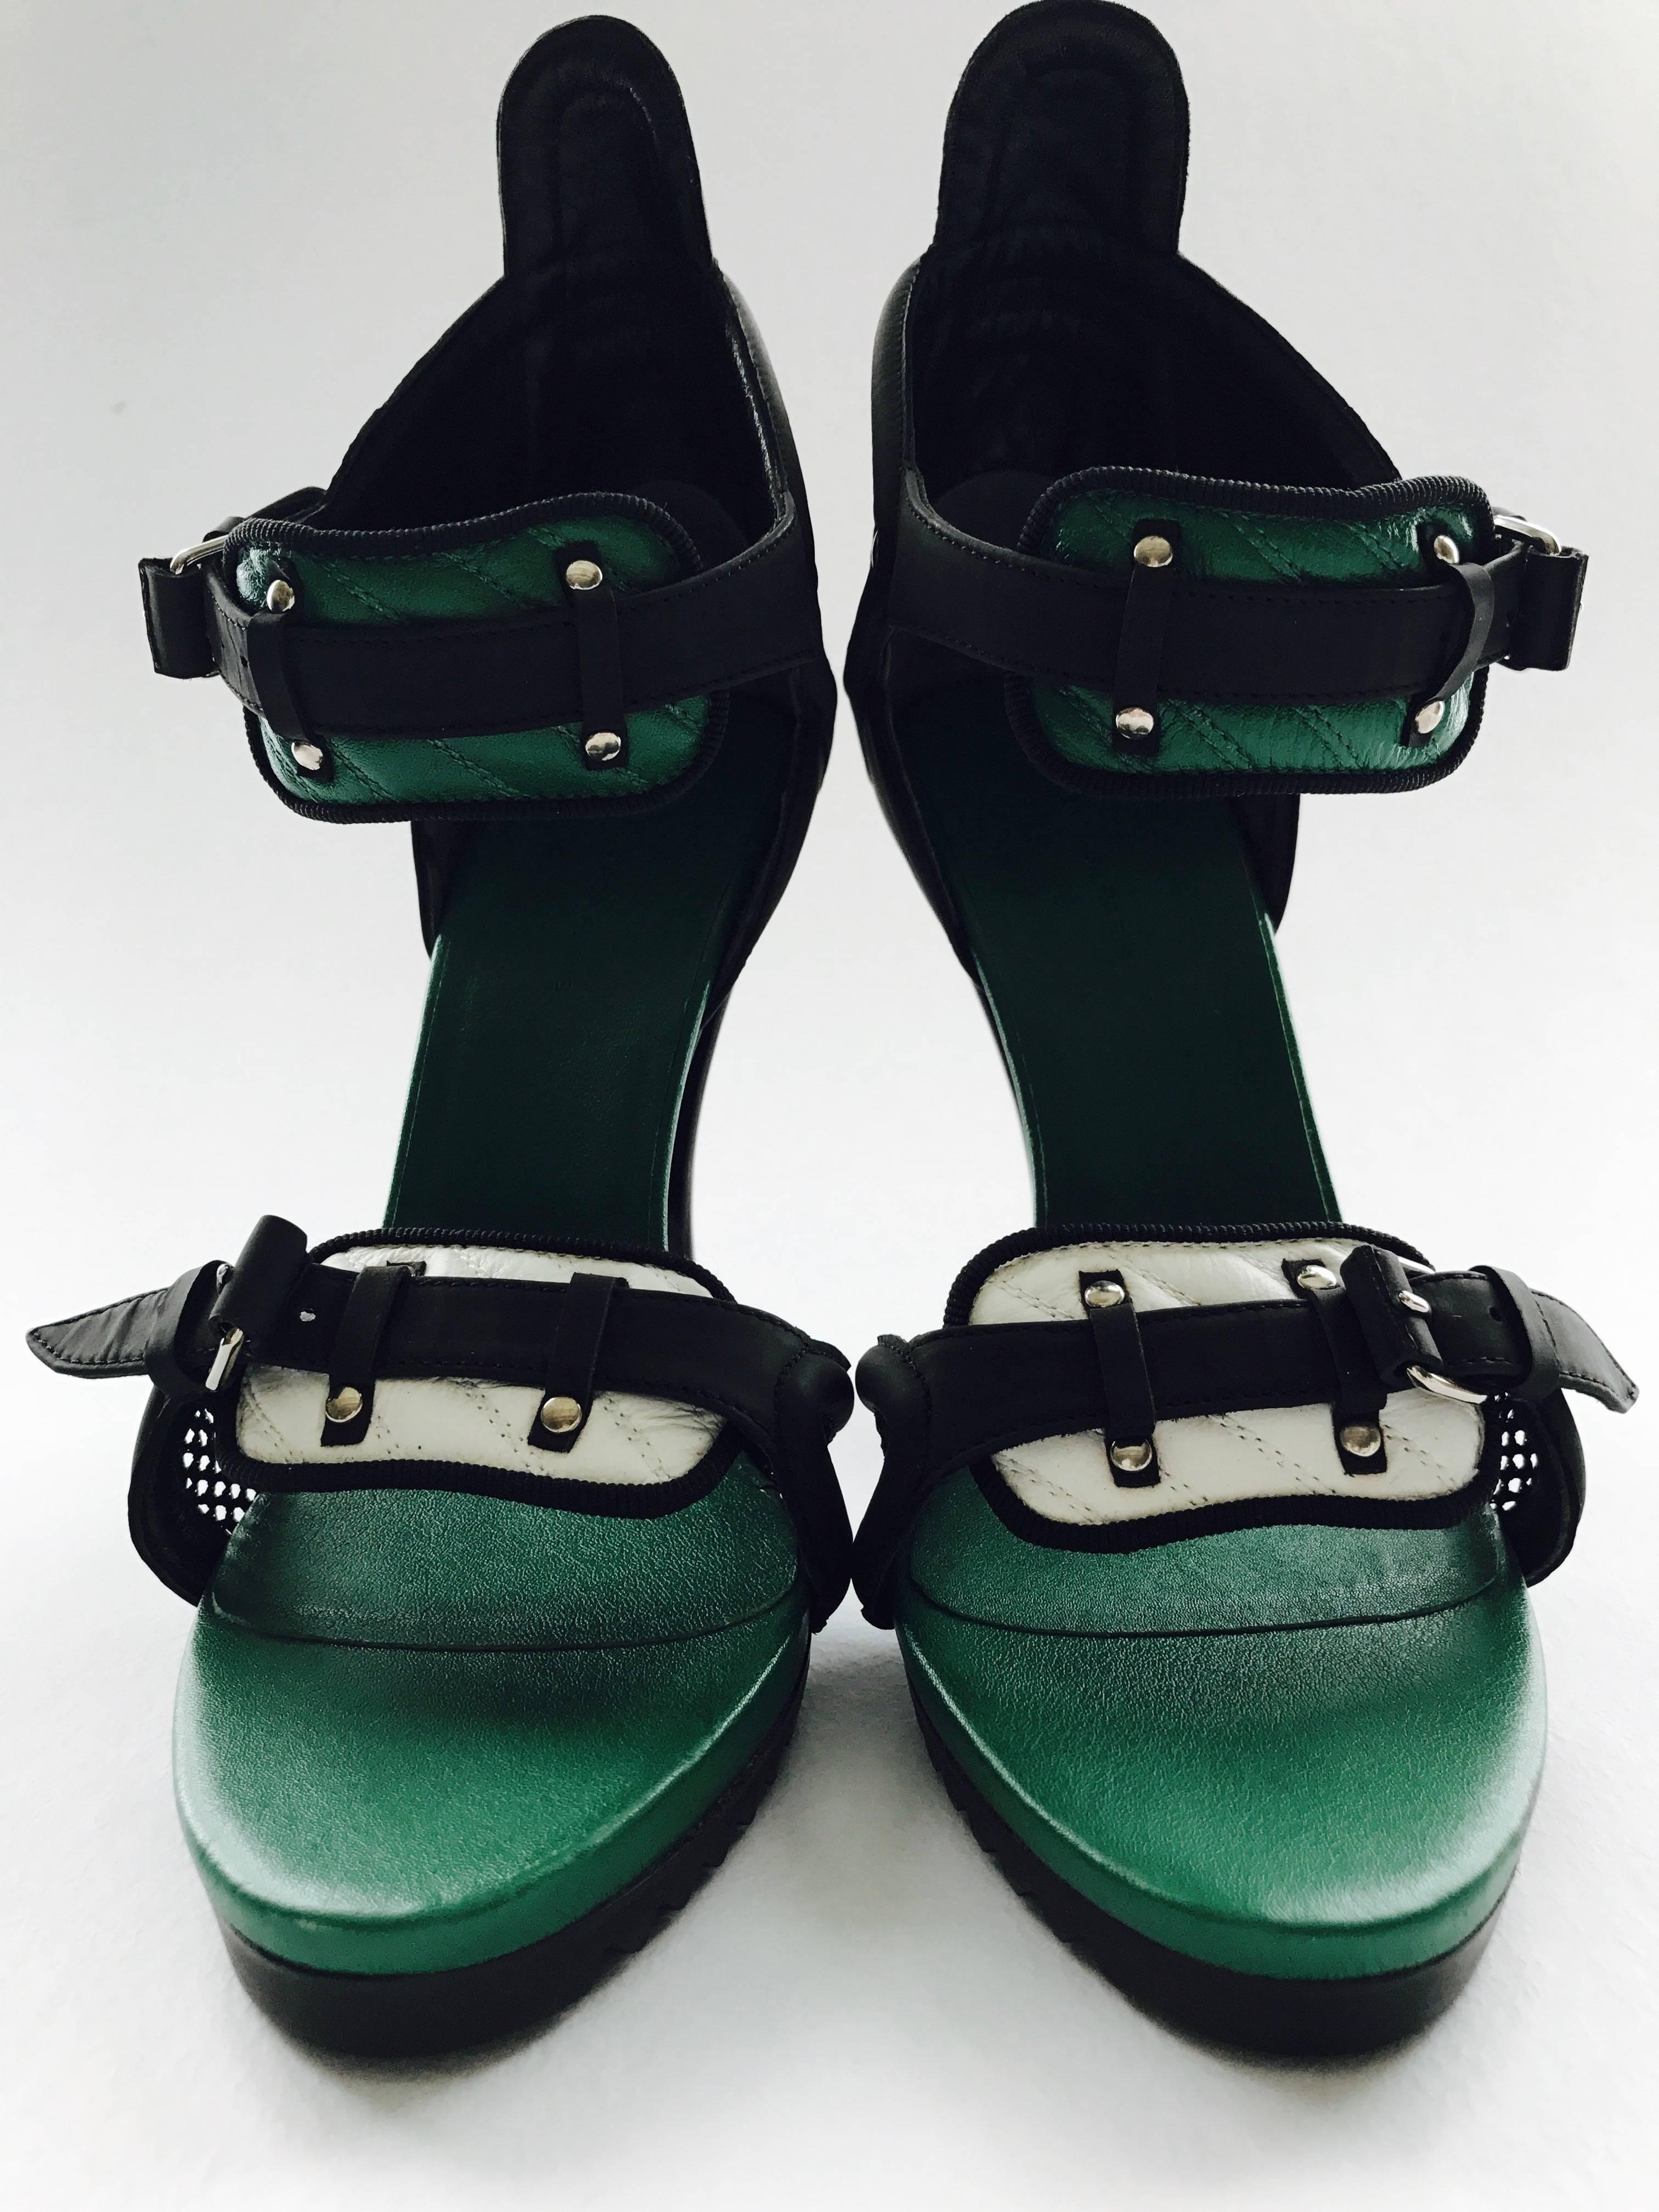 High heel black rubber ankle strap sandals with green quilted accent on the ankle strap and a white quilted accent on the toe part with black side netting. The shoe closes with two adjustable black straps that are 1/2in wide. The lower back of the